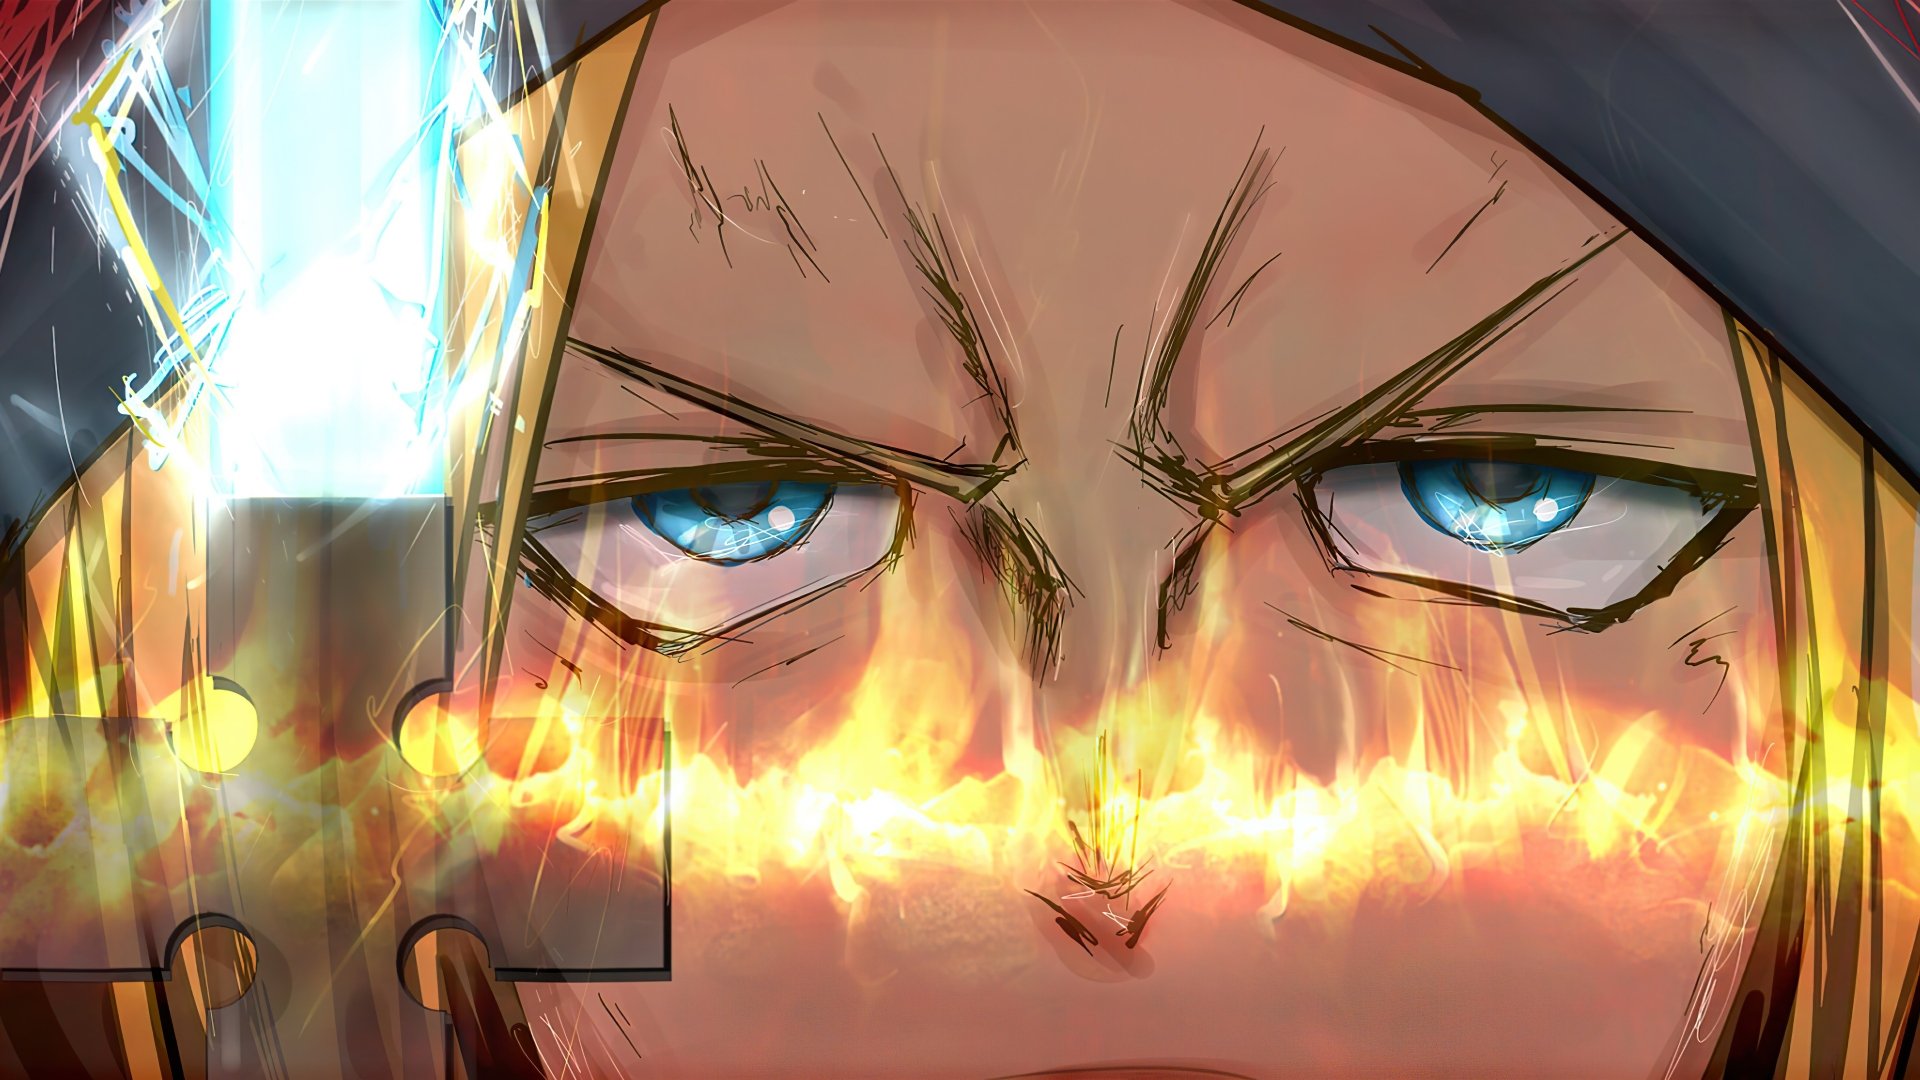 Arthur Boyle from Fire Force in an anime-inspired HD desktop wallpaper, showcasing vibrant colors and strong character design.